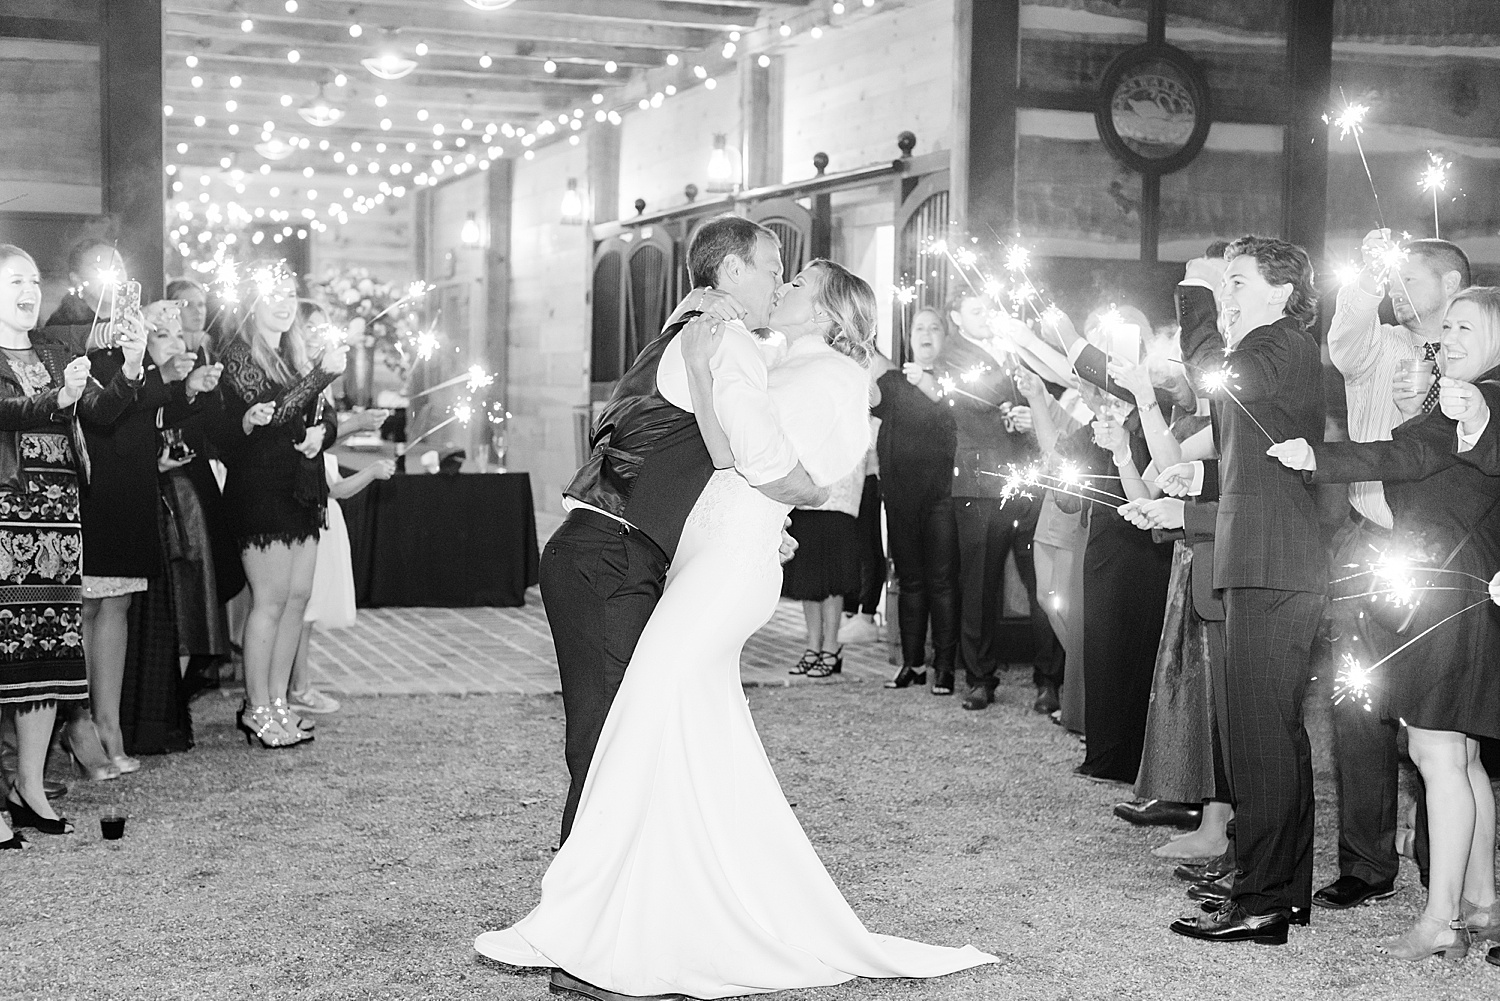 newlyweds at the end of the night with wedding guests holding sparklers